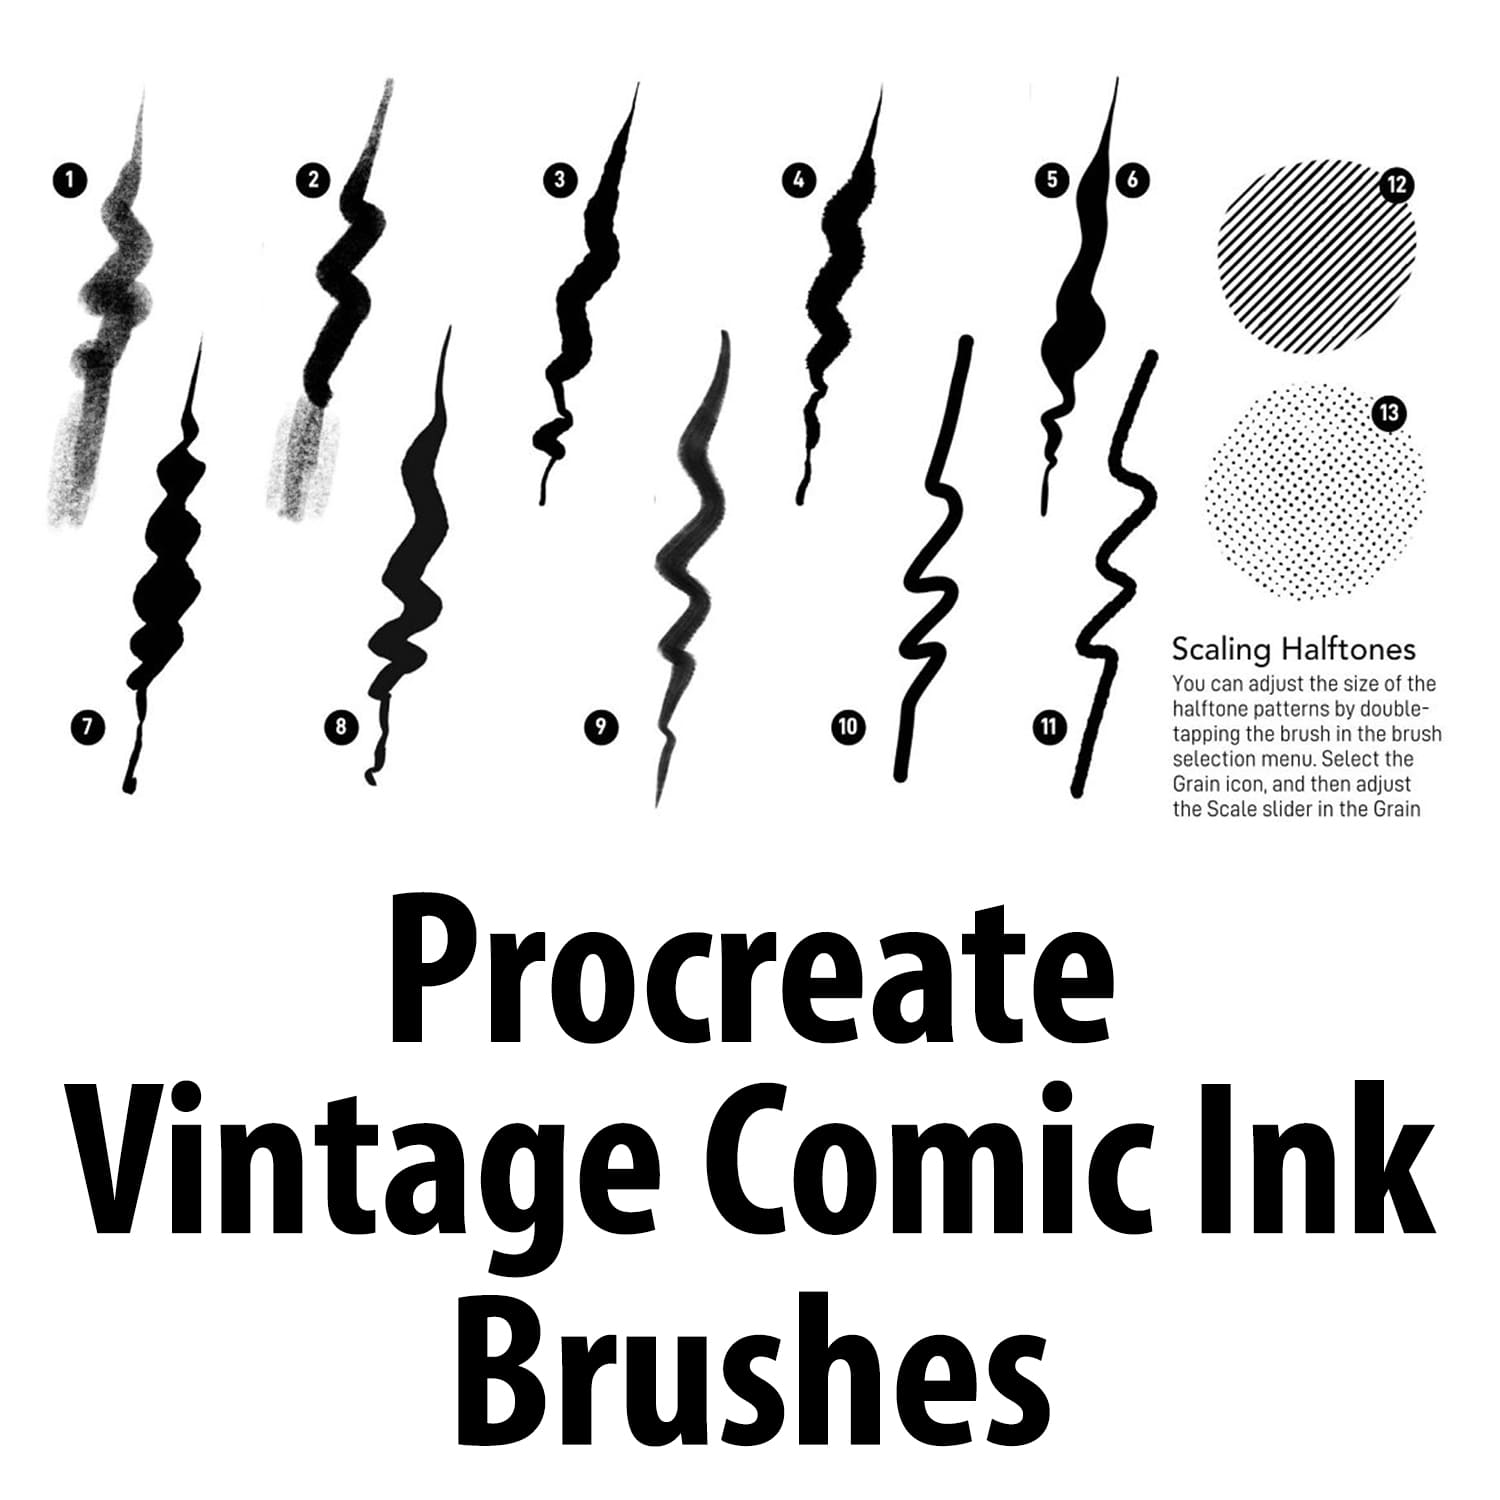 Procreate Vintage Comic Ink Brushes main cover.